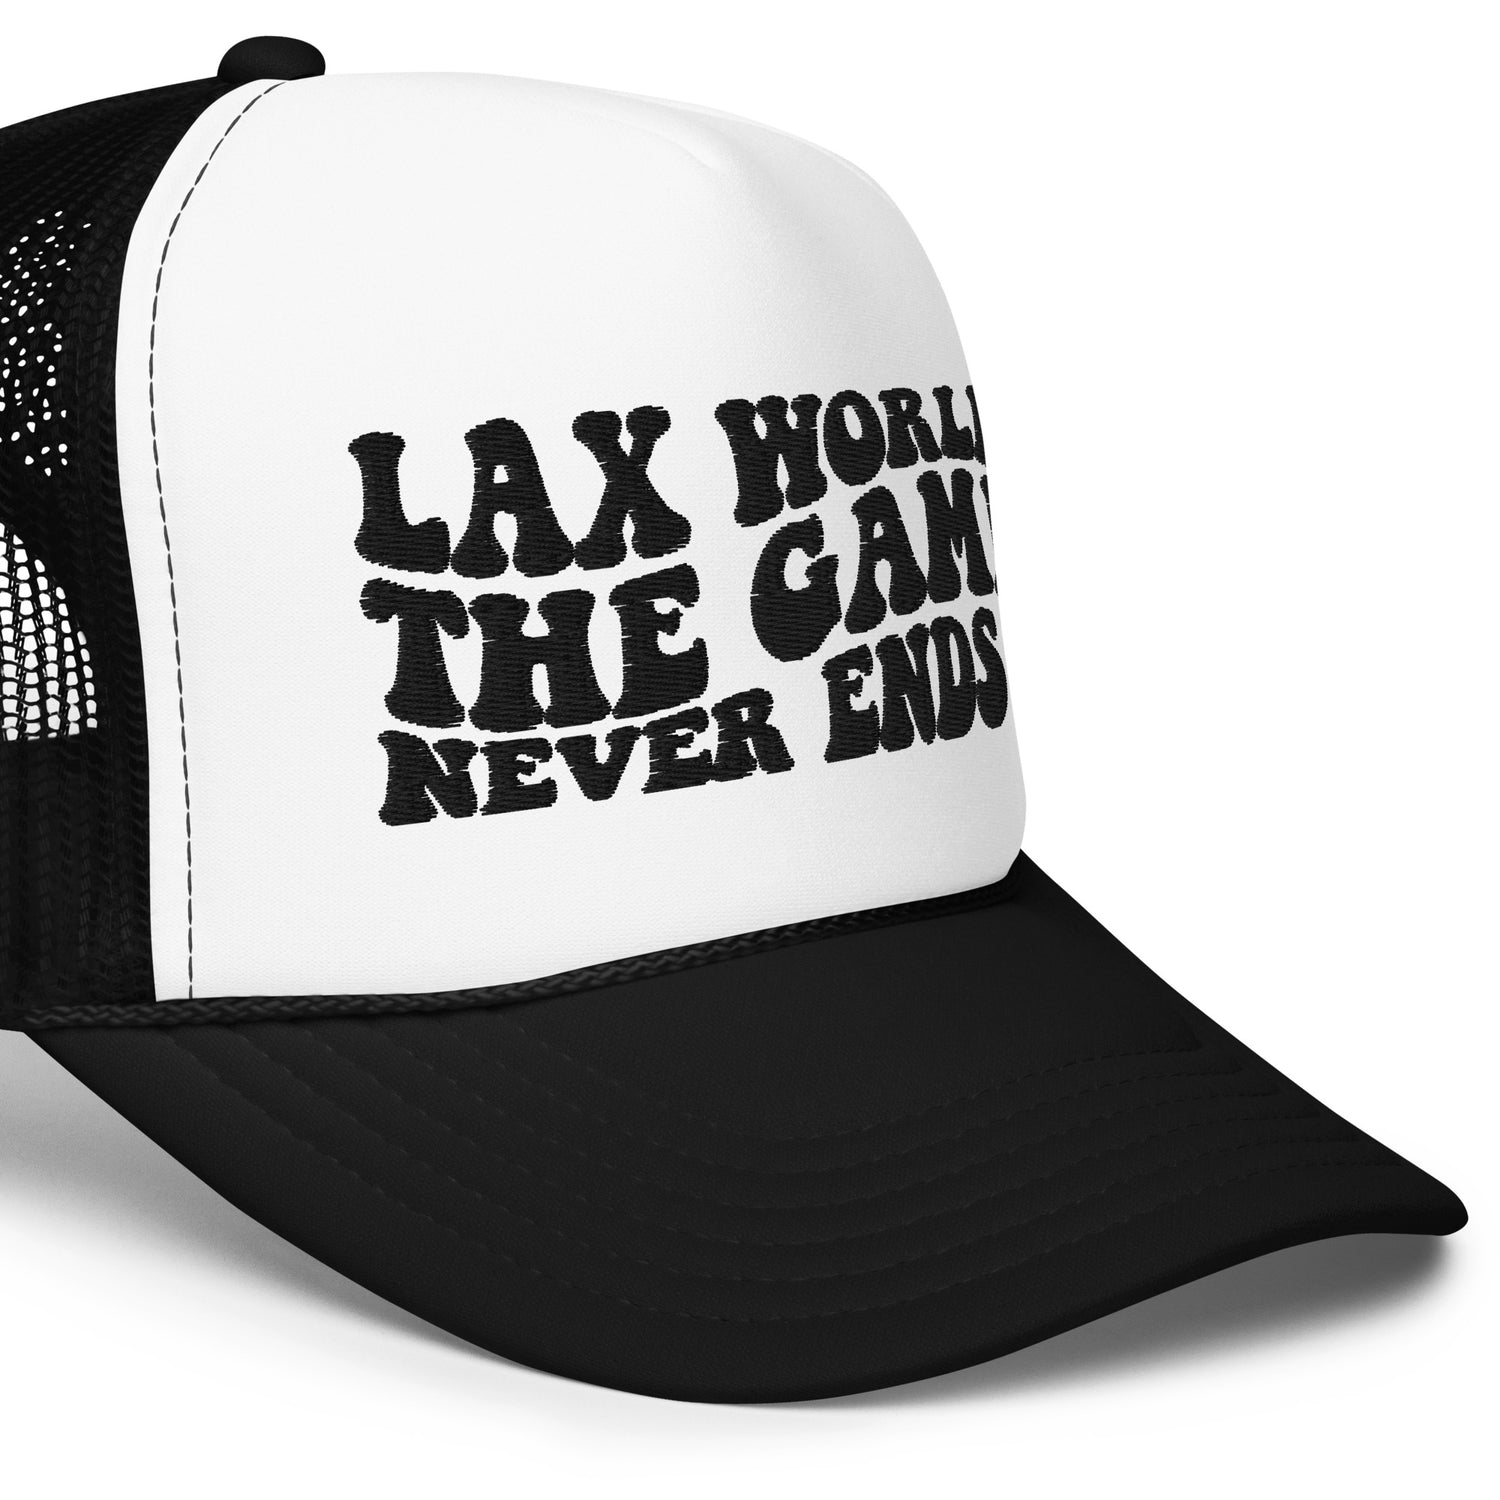 The Game Never Ends… Trucker Hat